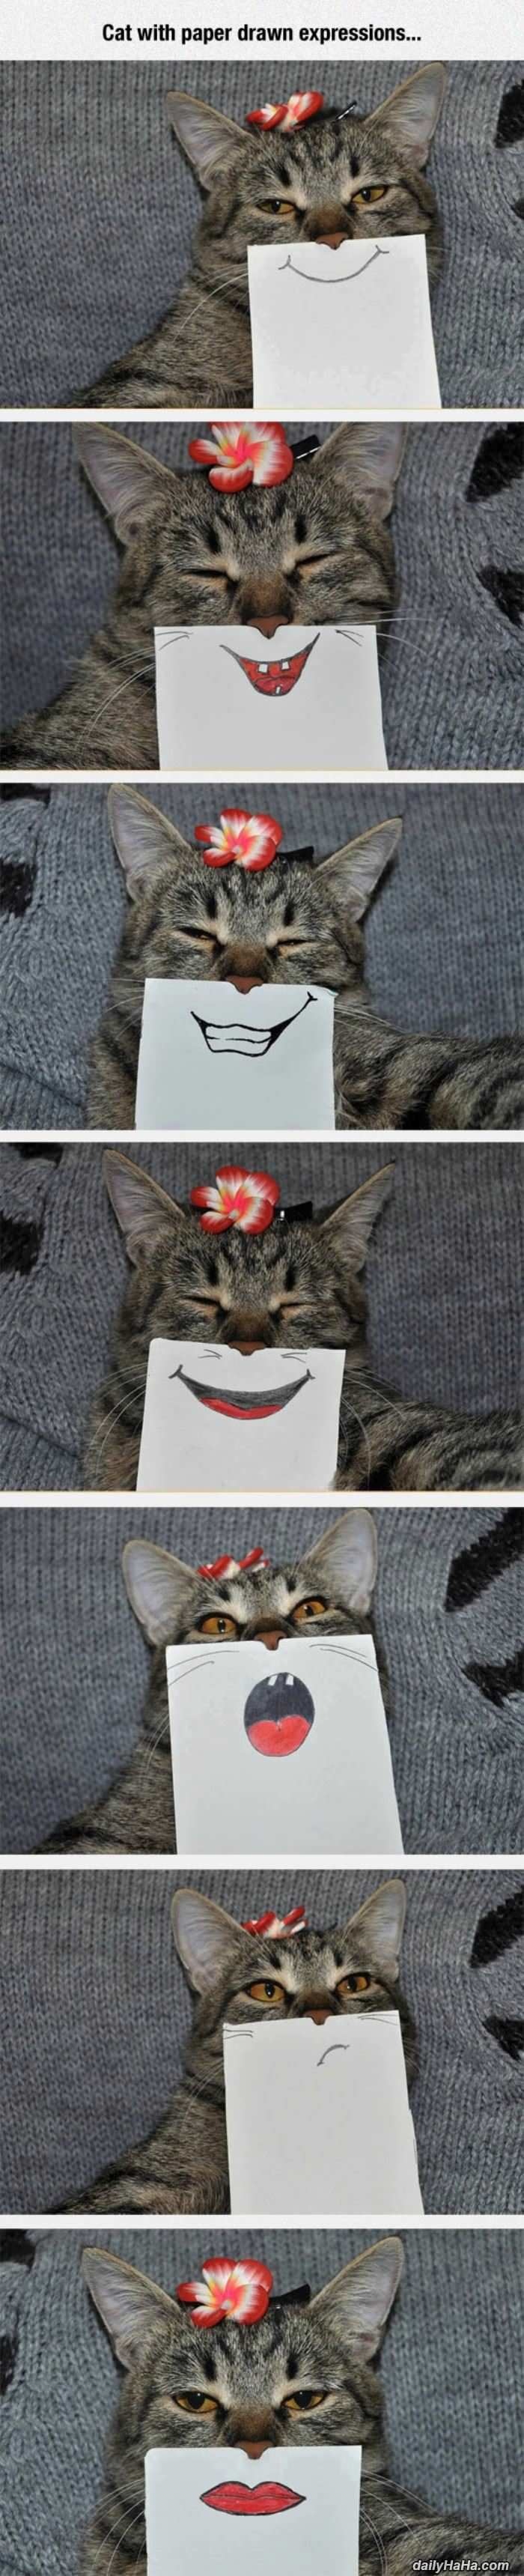 This cat of many emotions.